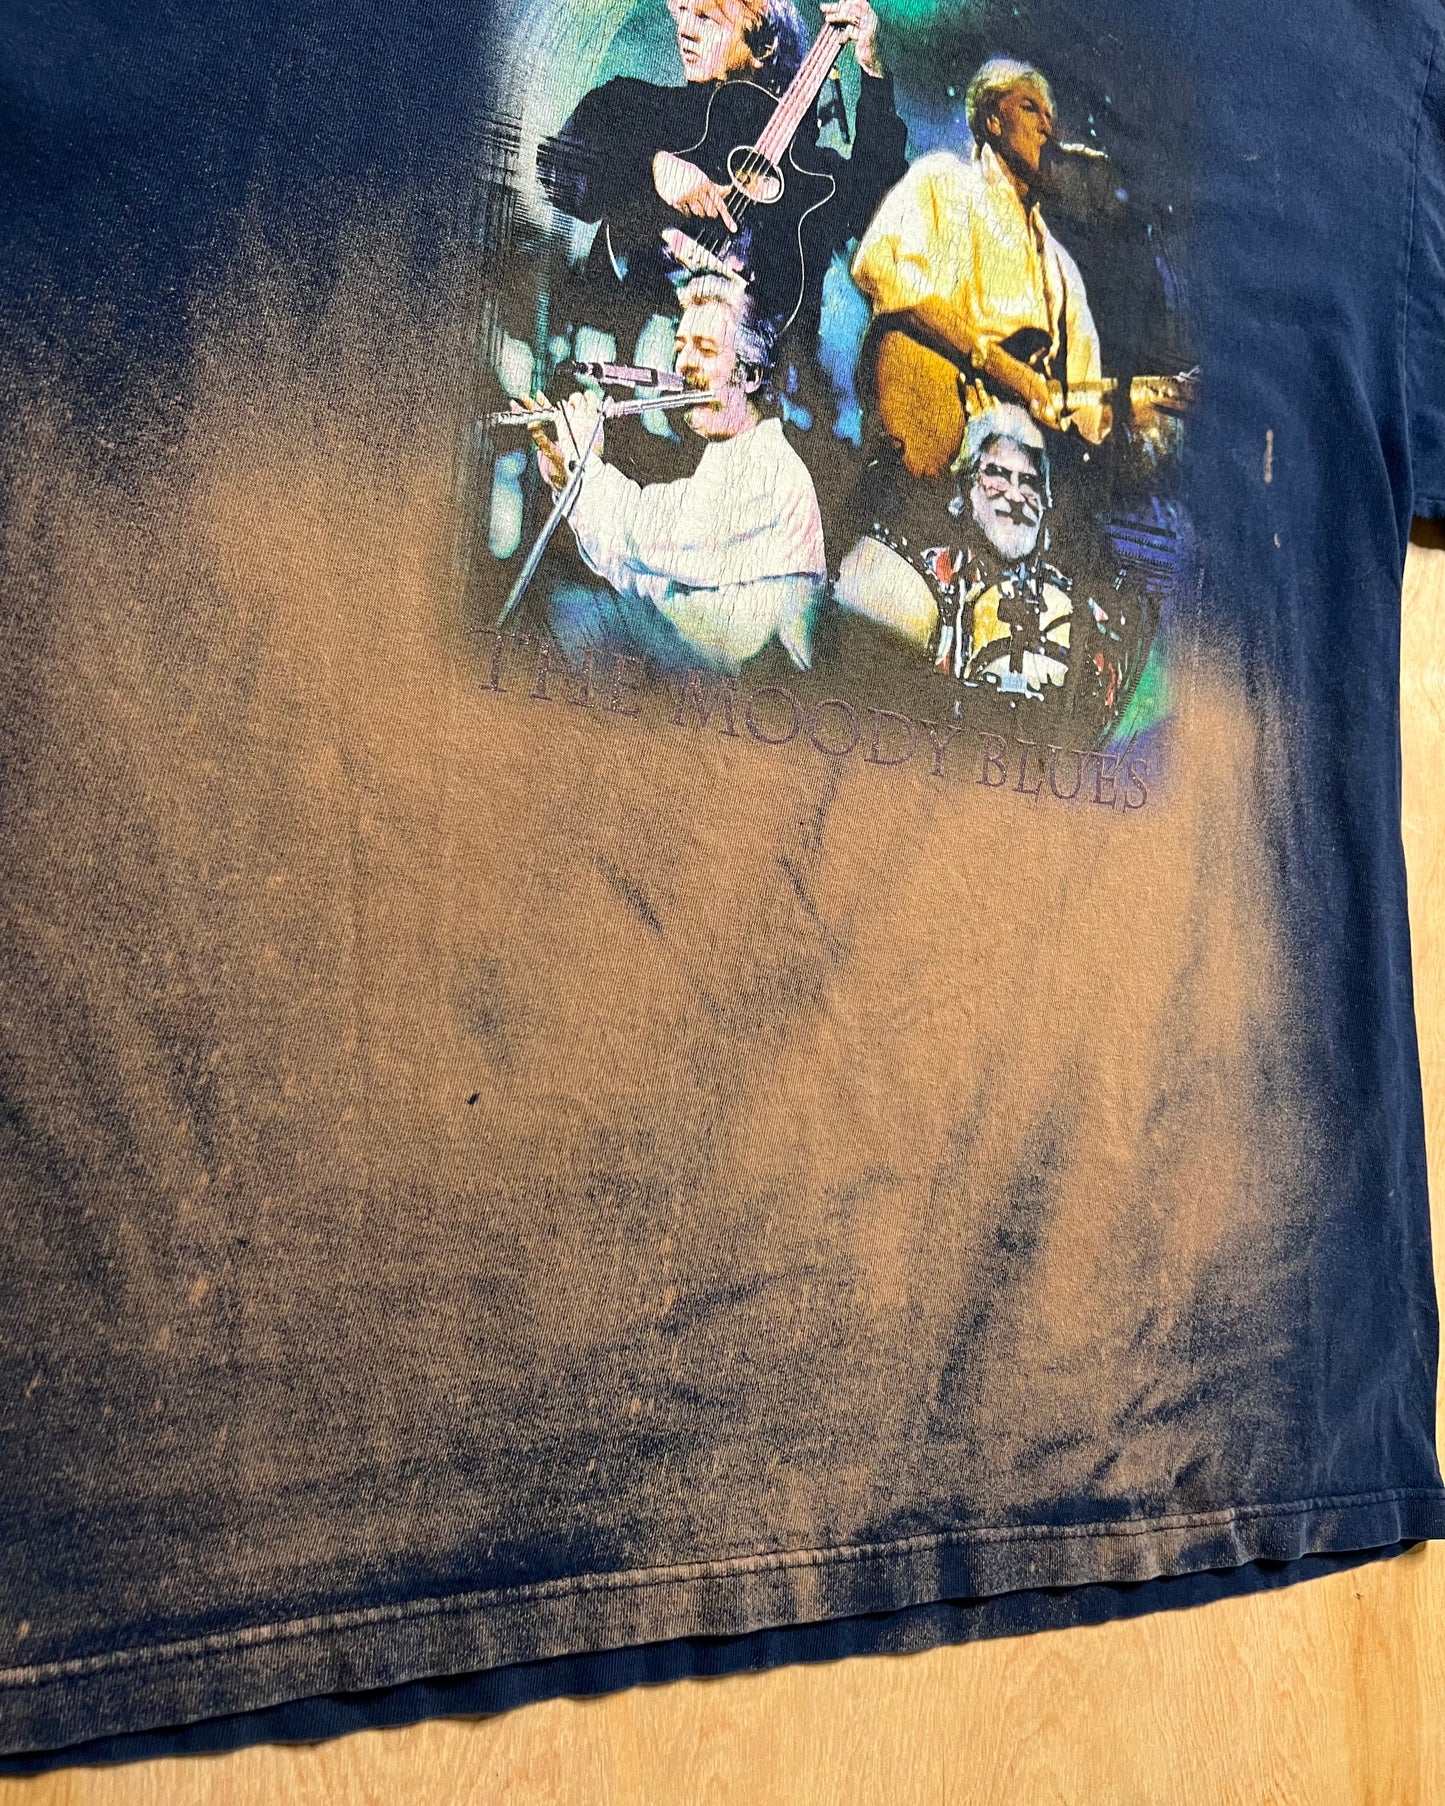 2000 The Moody Blues Hall of Fame Tour Bleached T-Shirt